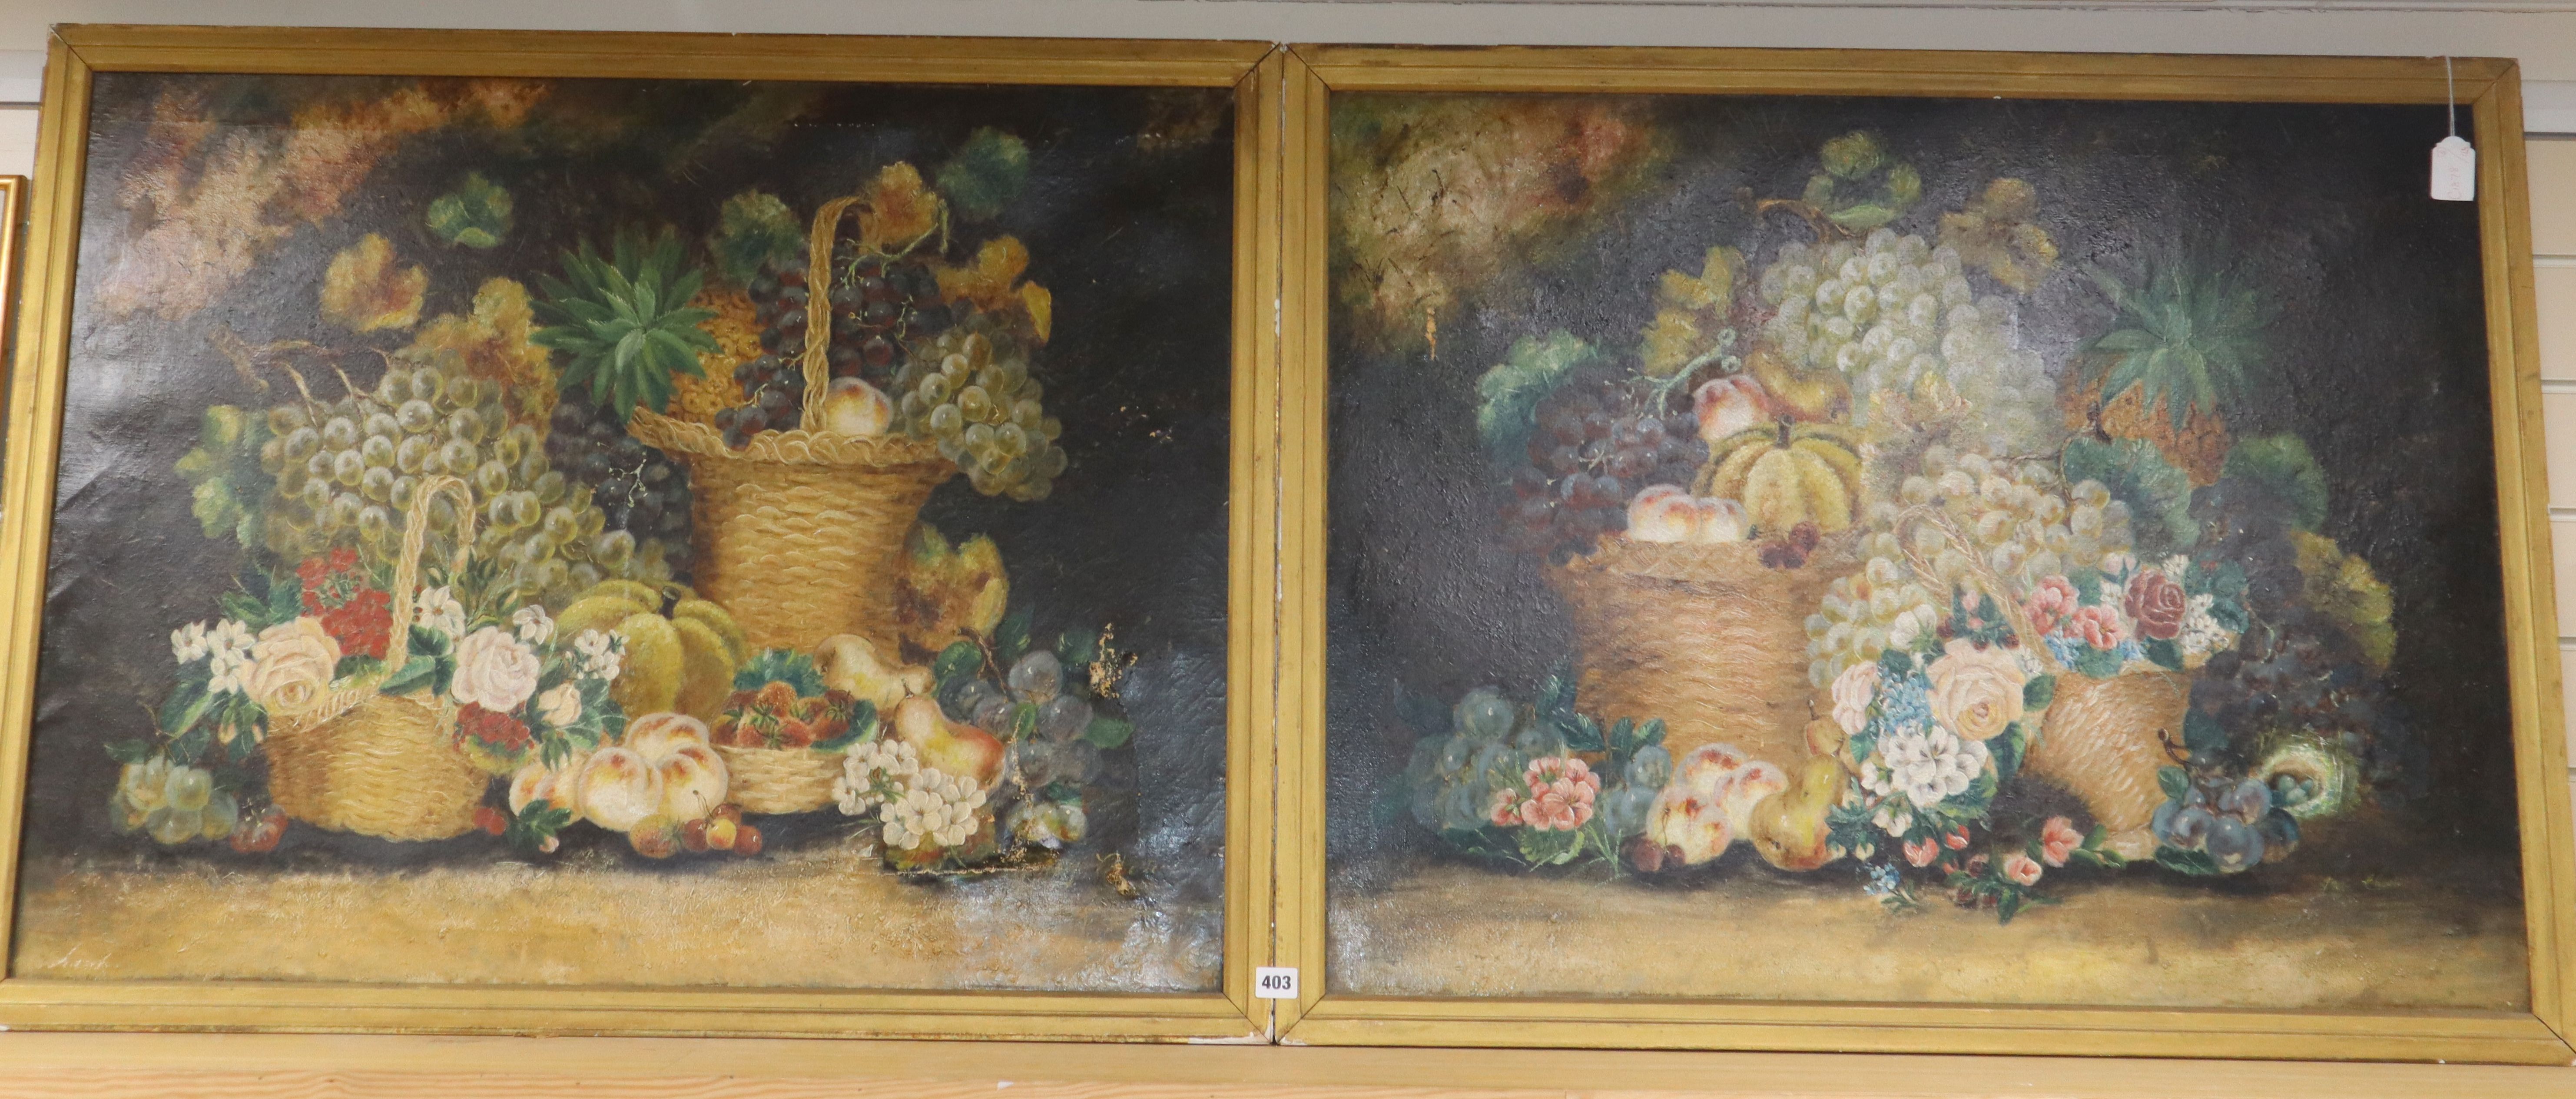 English School, pair of oils on canvas, Still lifes of fruit and flowers in basket, 70 x 90cm and